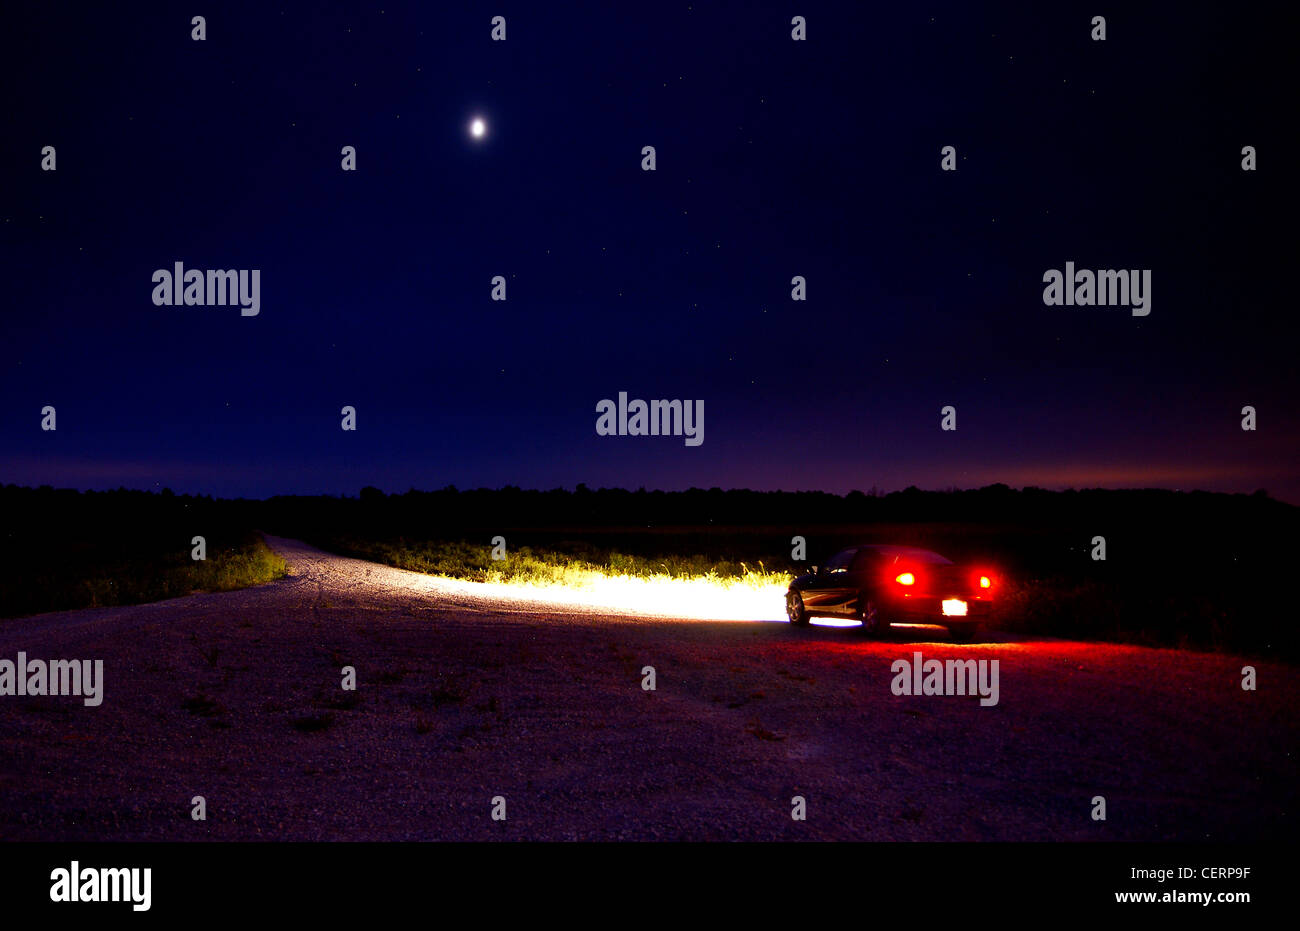 A car parked at the side of the road under the moon. Stock Photo